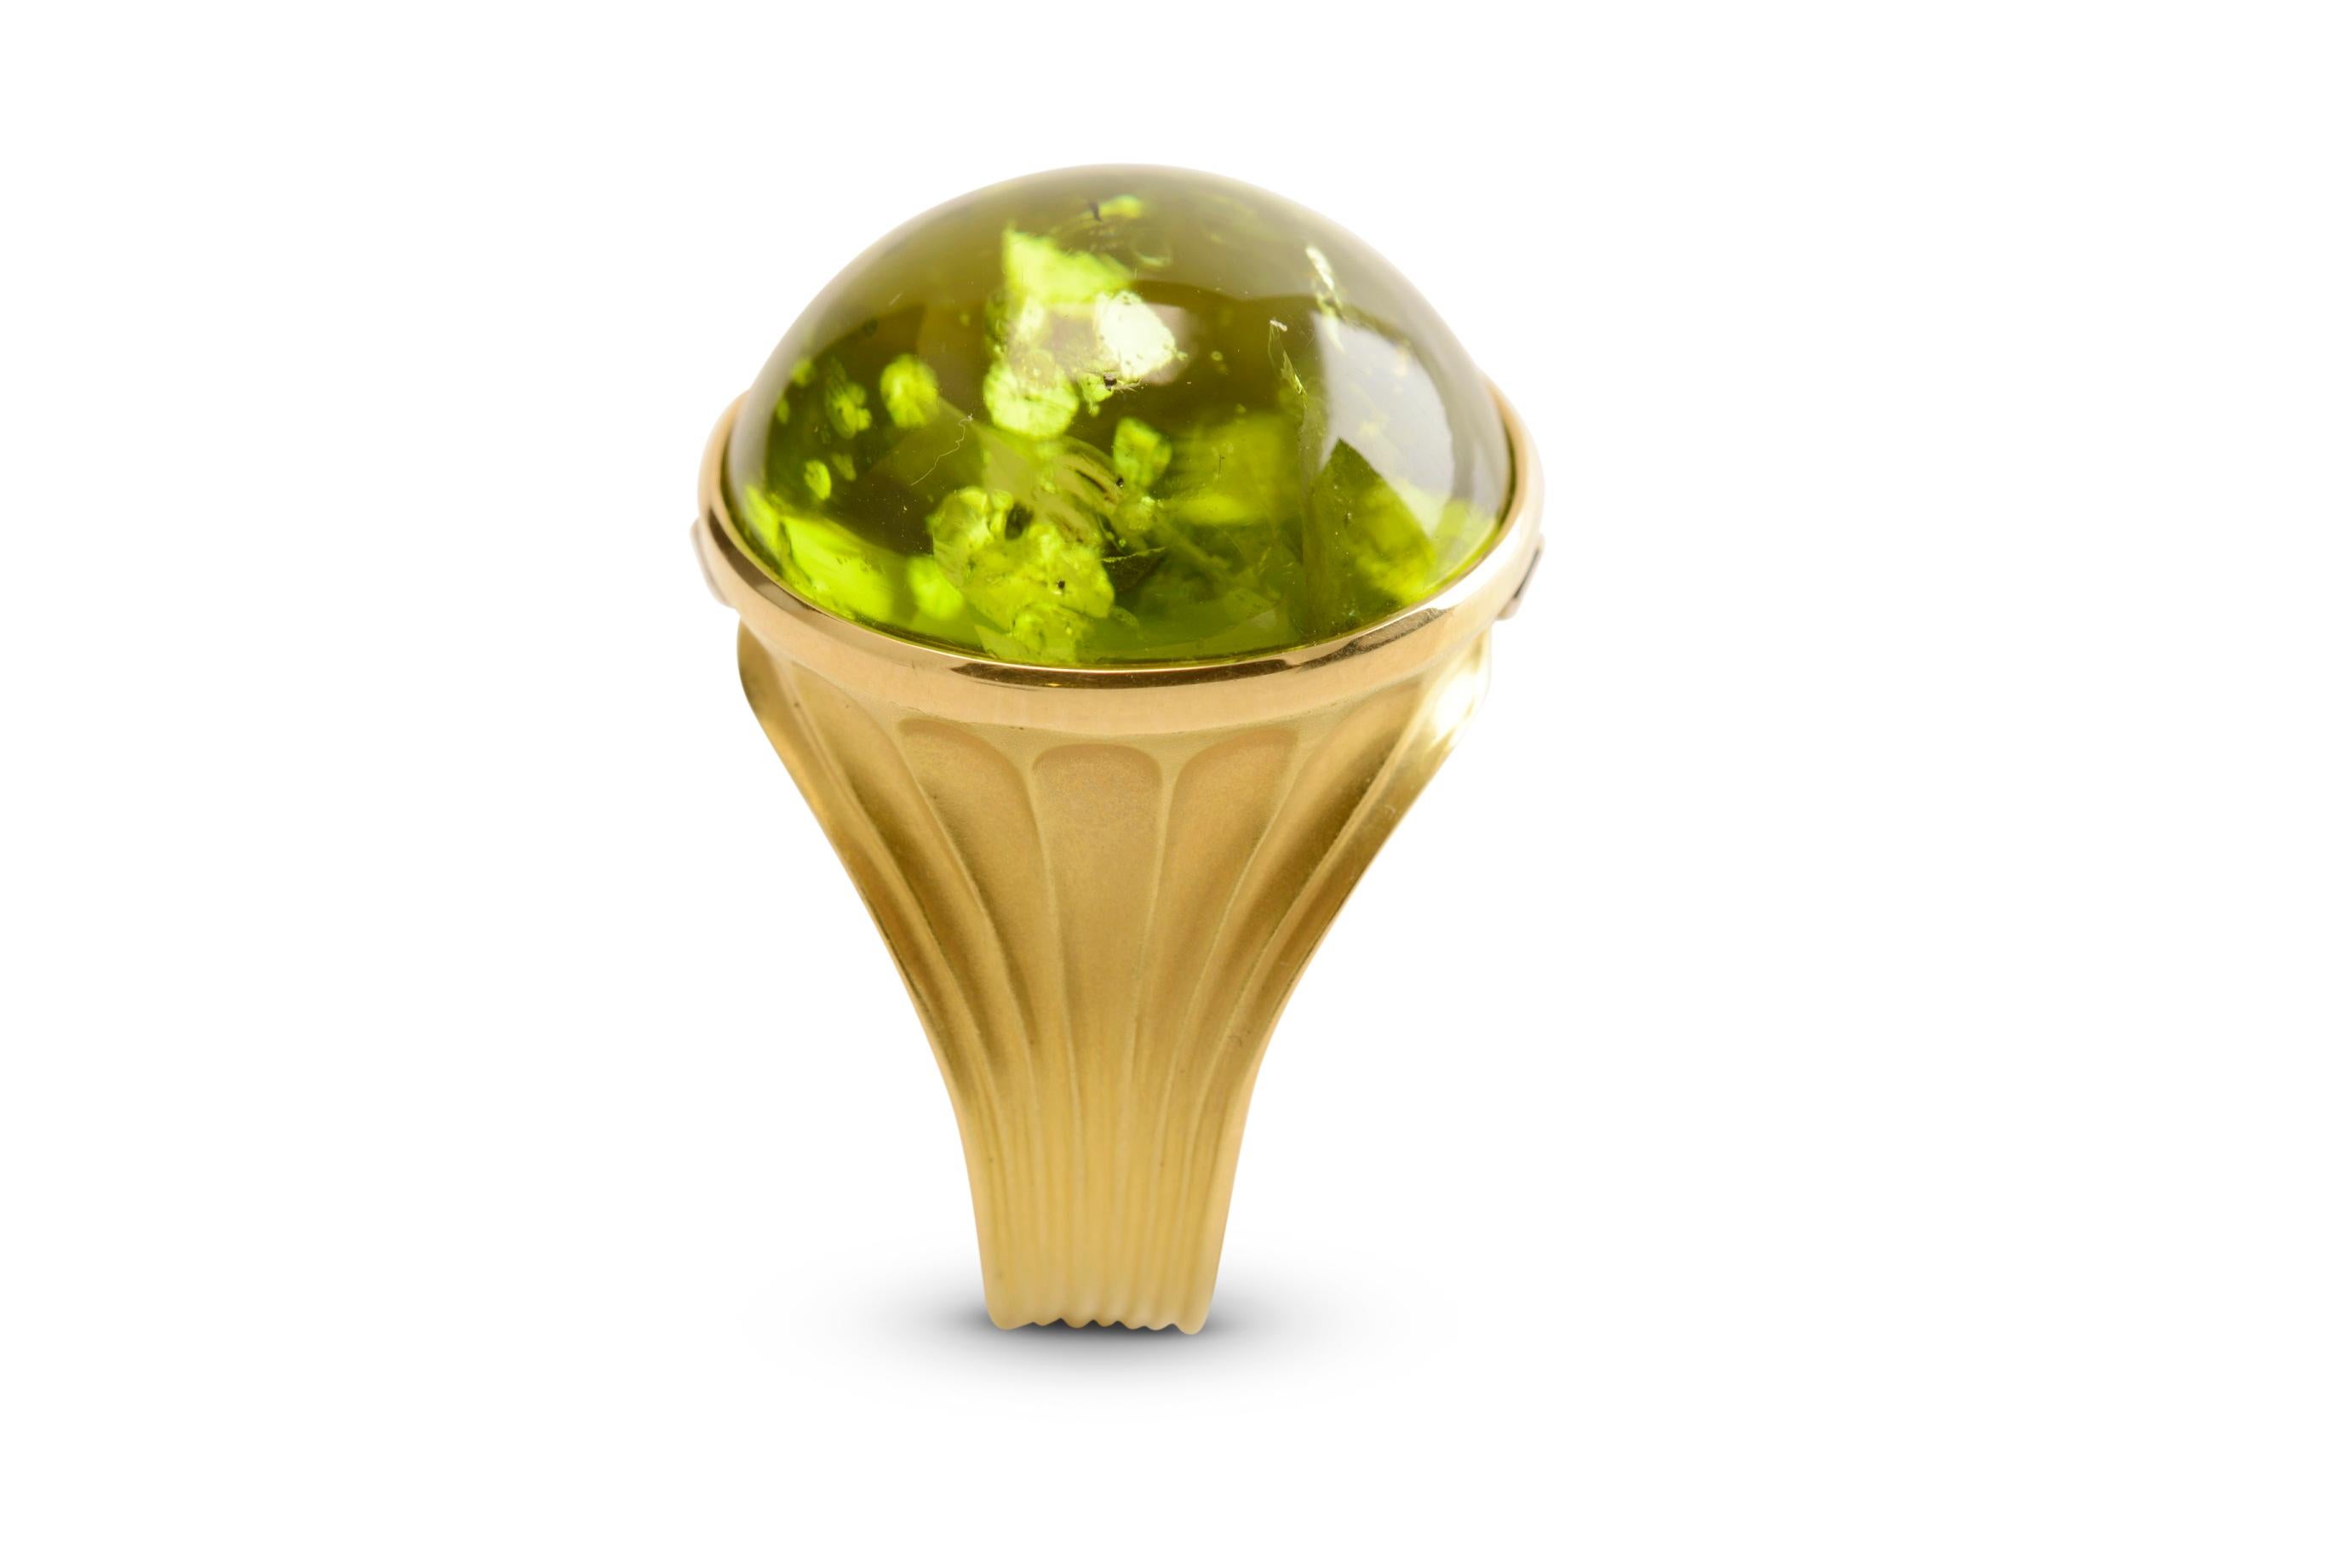 A magnificent peridot cabochon of 38.40 carats sits in an 18 karat yellow gold hand forged setting, a cocktail or dress ring that truly pushes the boundaries of what can be made in gold. The shank is gently concaved from the base and detailed with